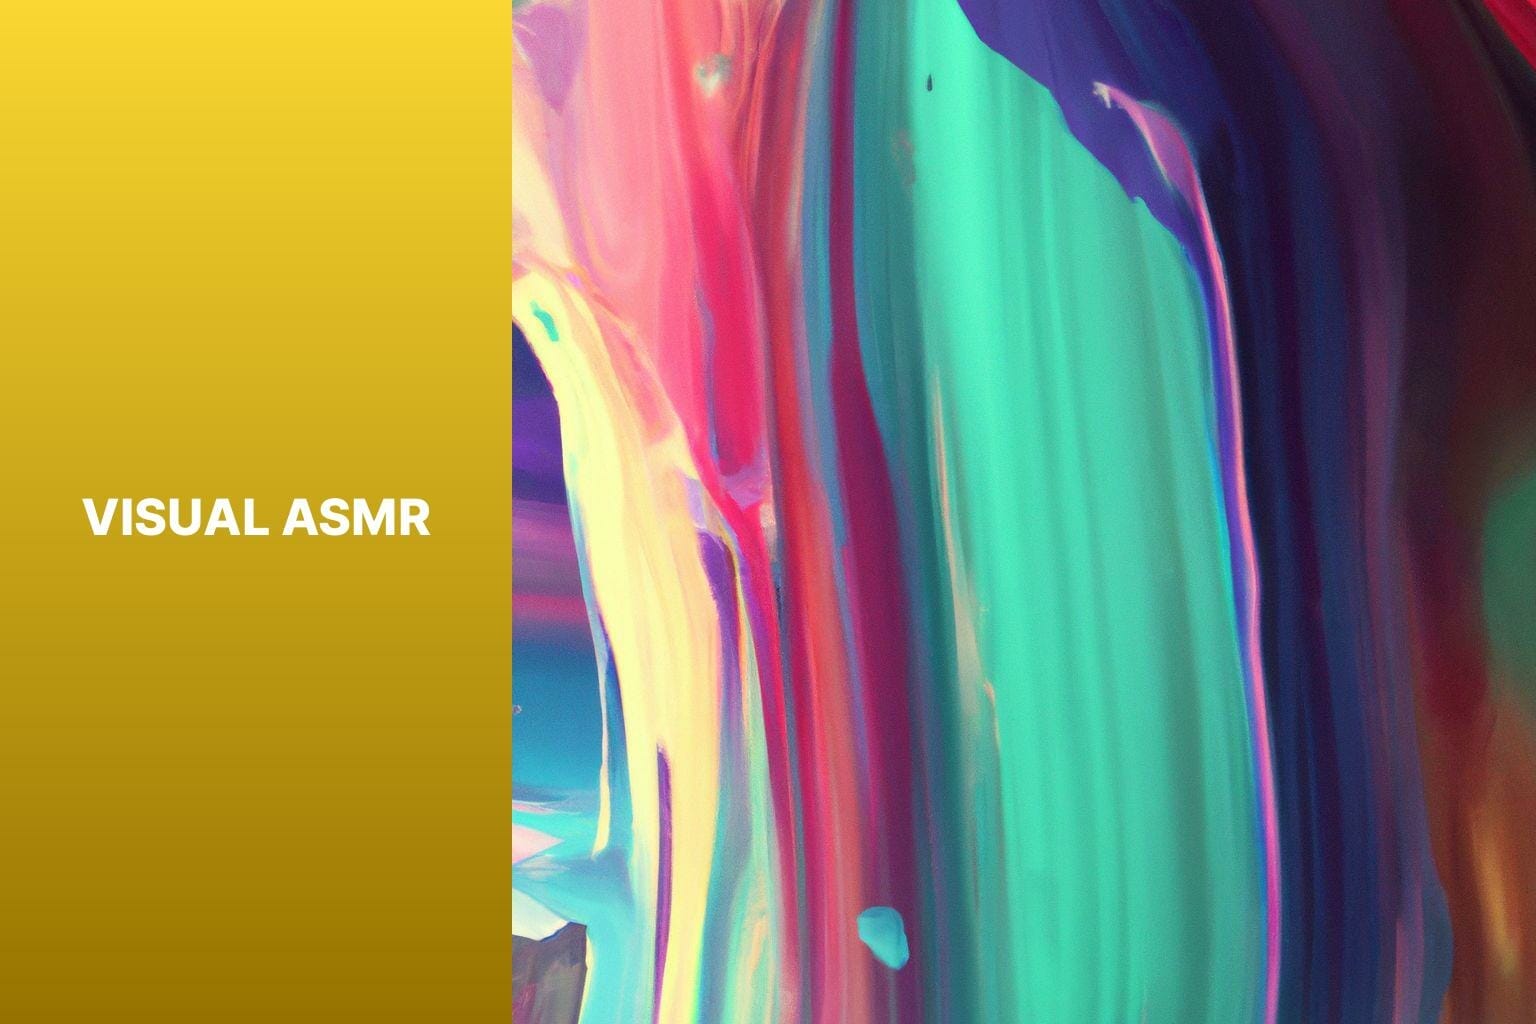 A colorful background with a visual ASMR.